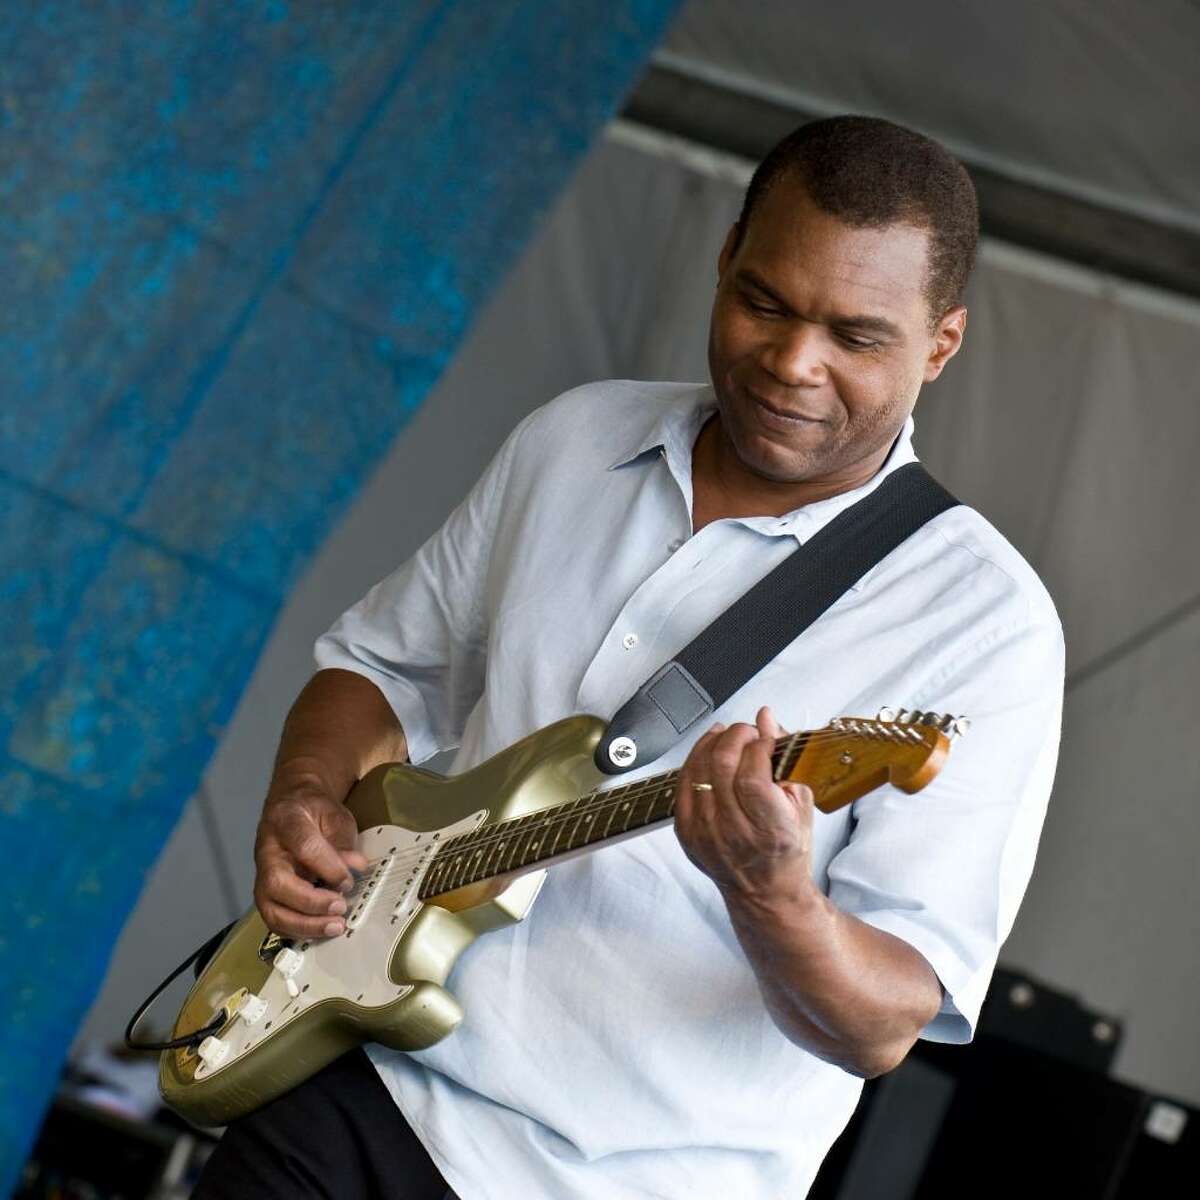 Robert Cray performs at the 40th Annual New Orleans Jazz & Heritage Festival in New Orleans, LA, April 26, 2009. (C) Erika Goldring - All Rights Reserved.